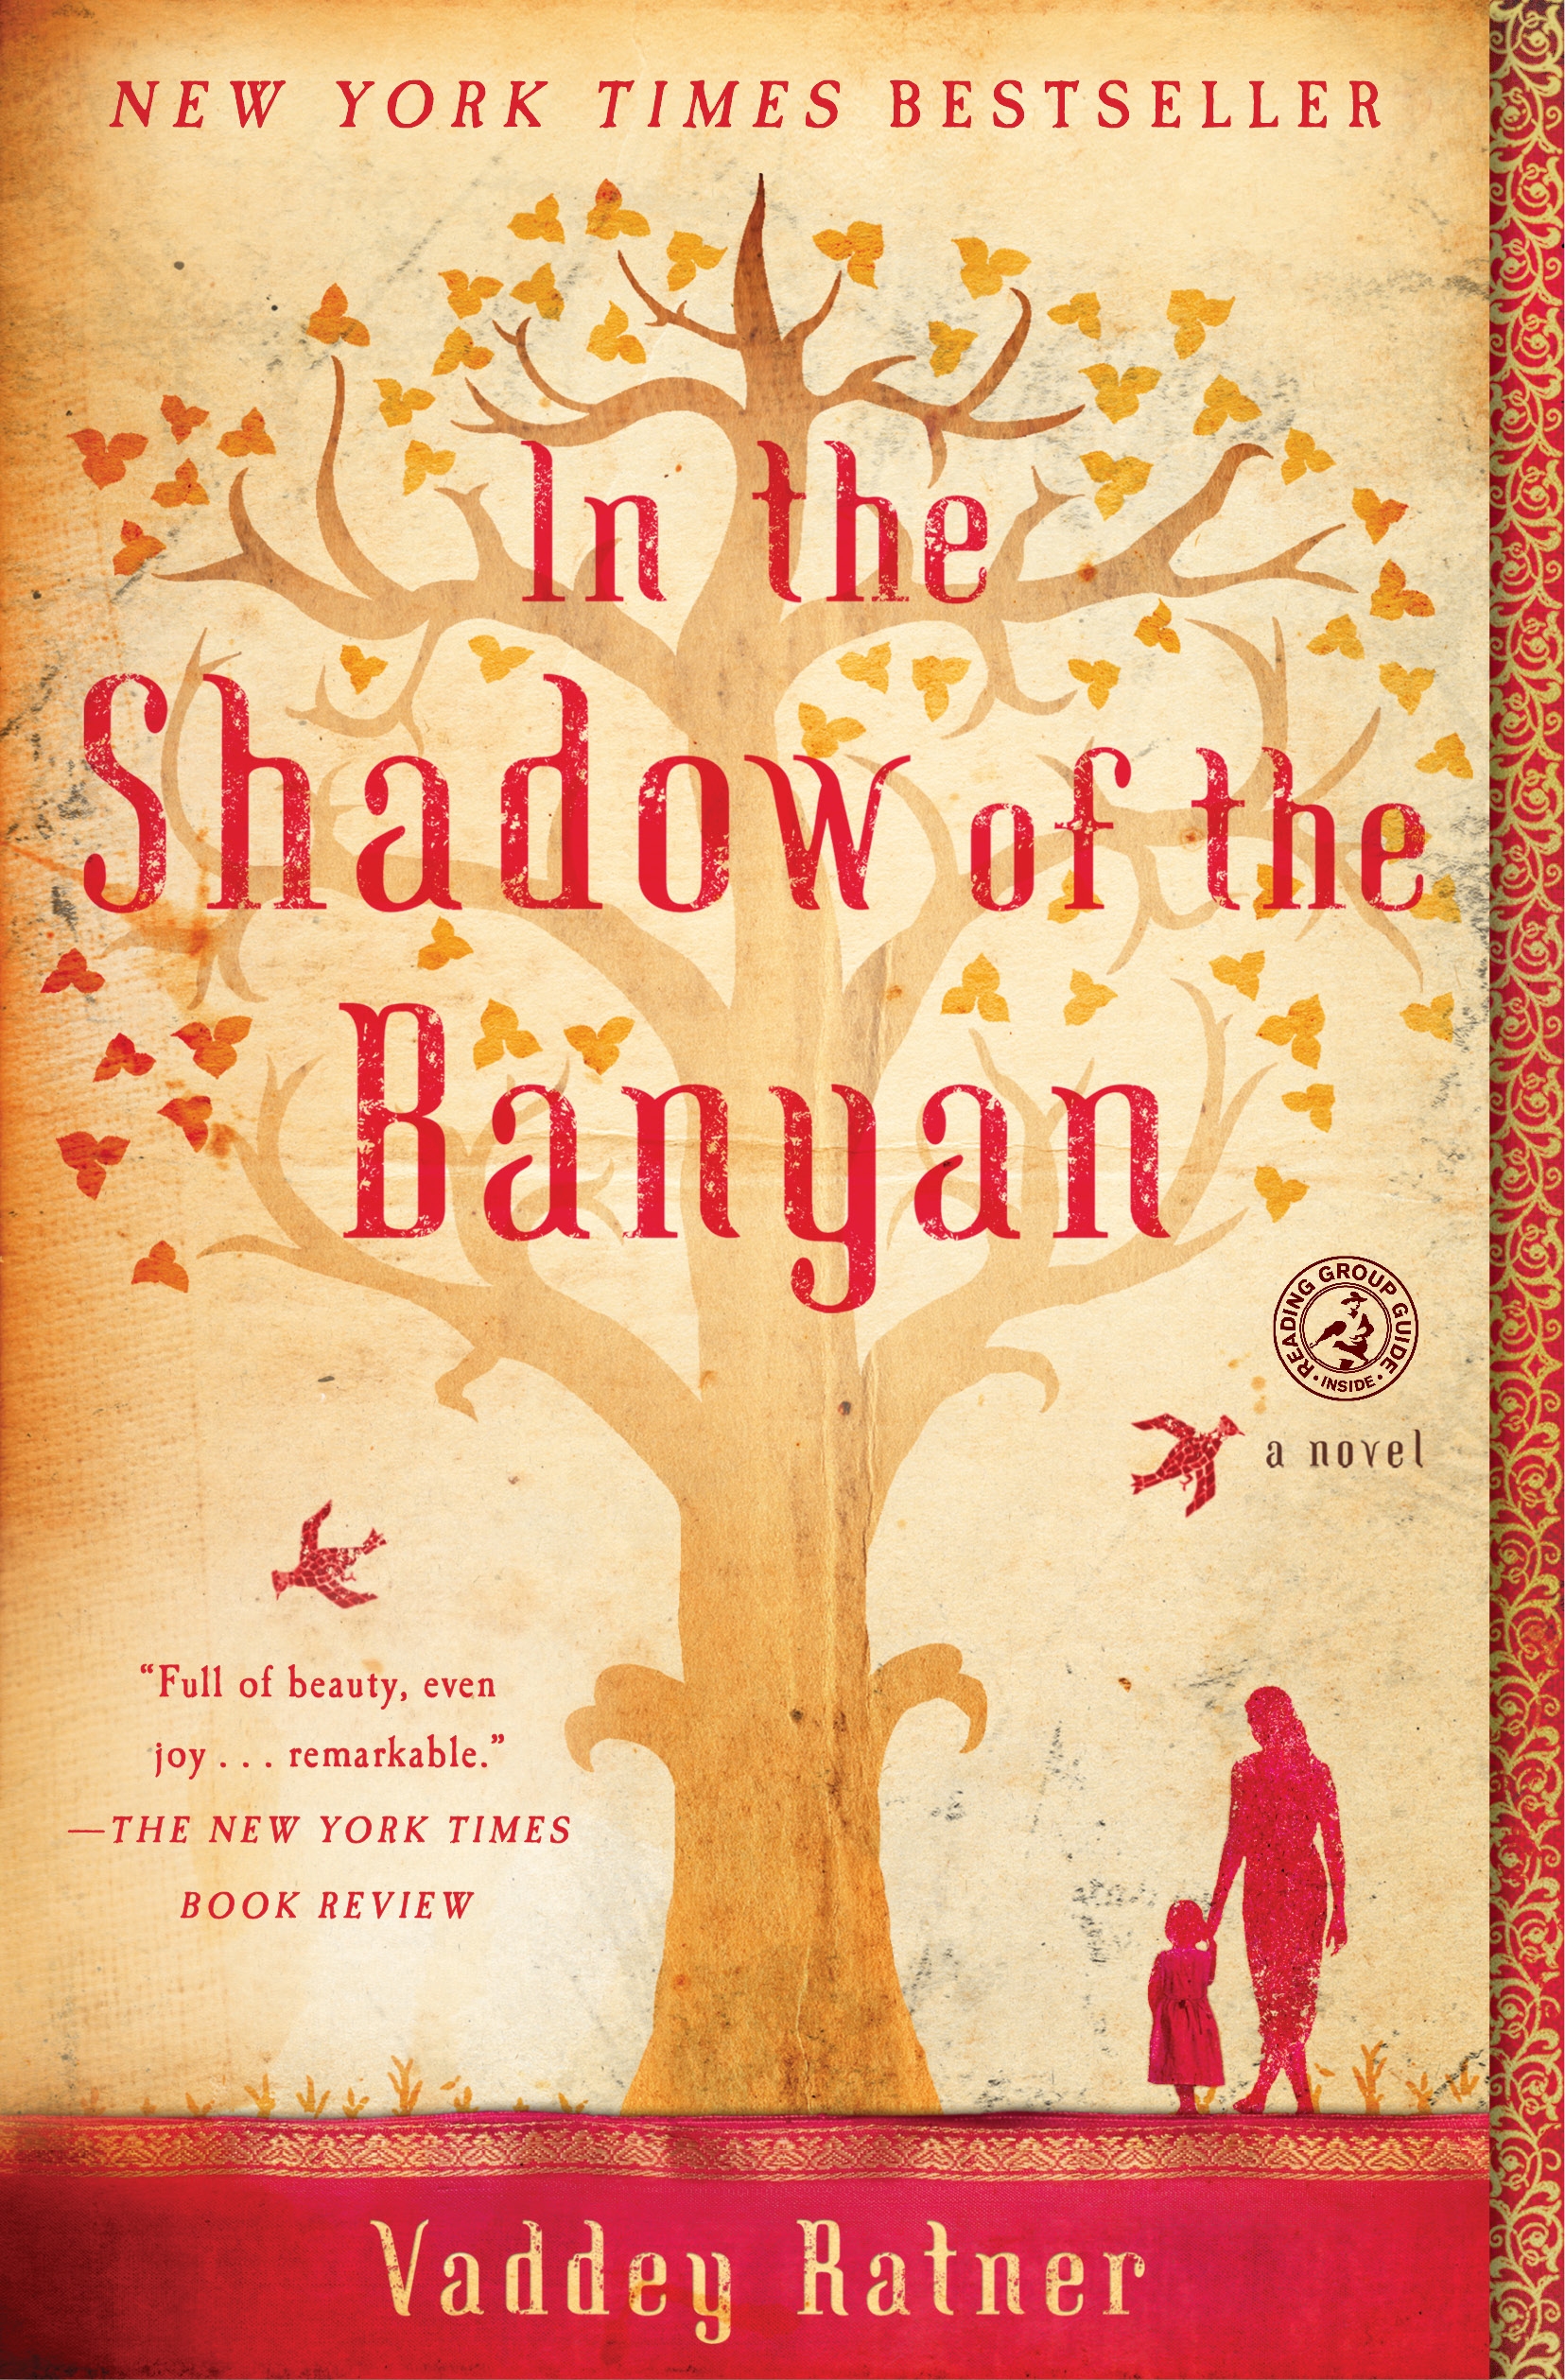 Book cover: author name and title in red serif type over a yellow background of an orange watercolor of a banyan tree 